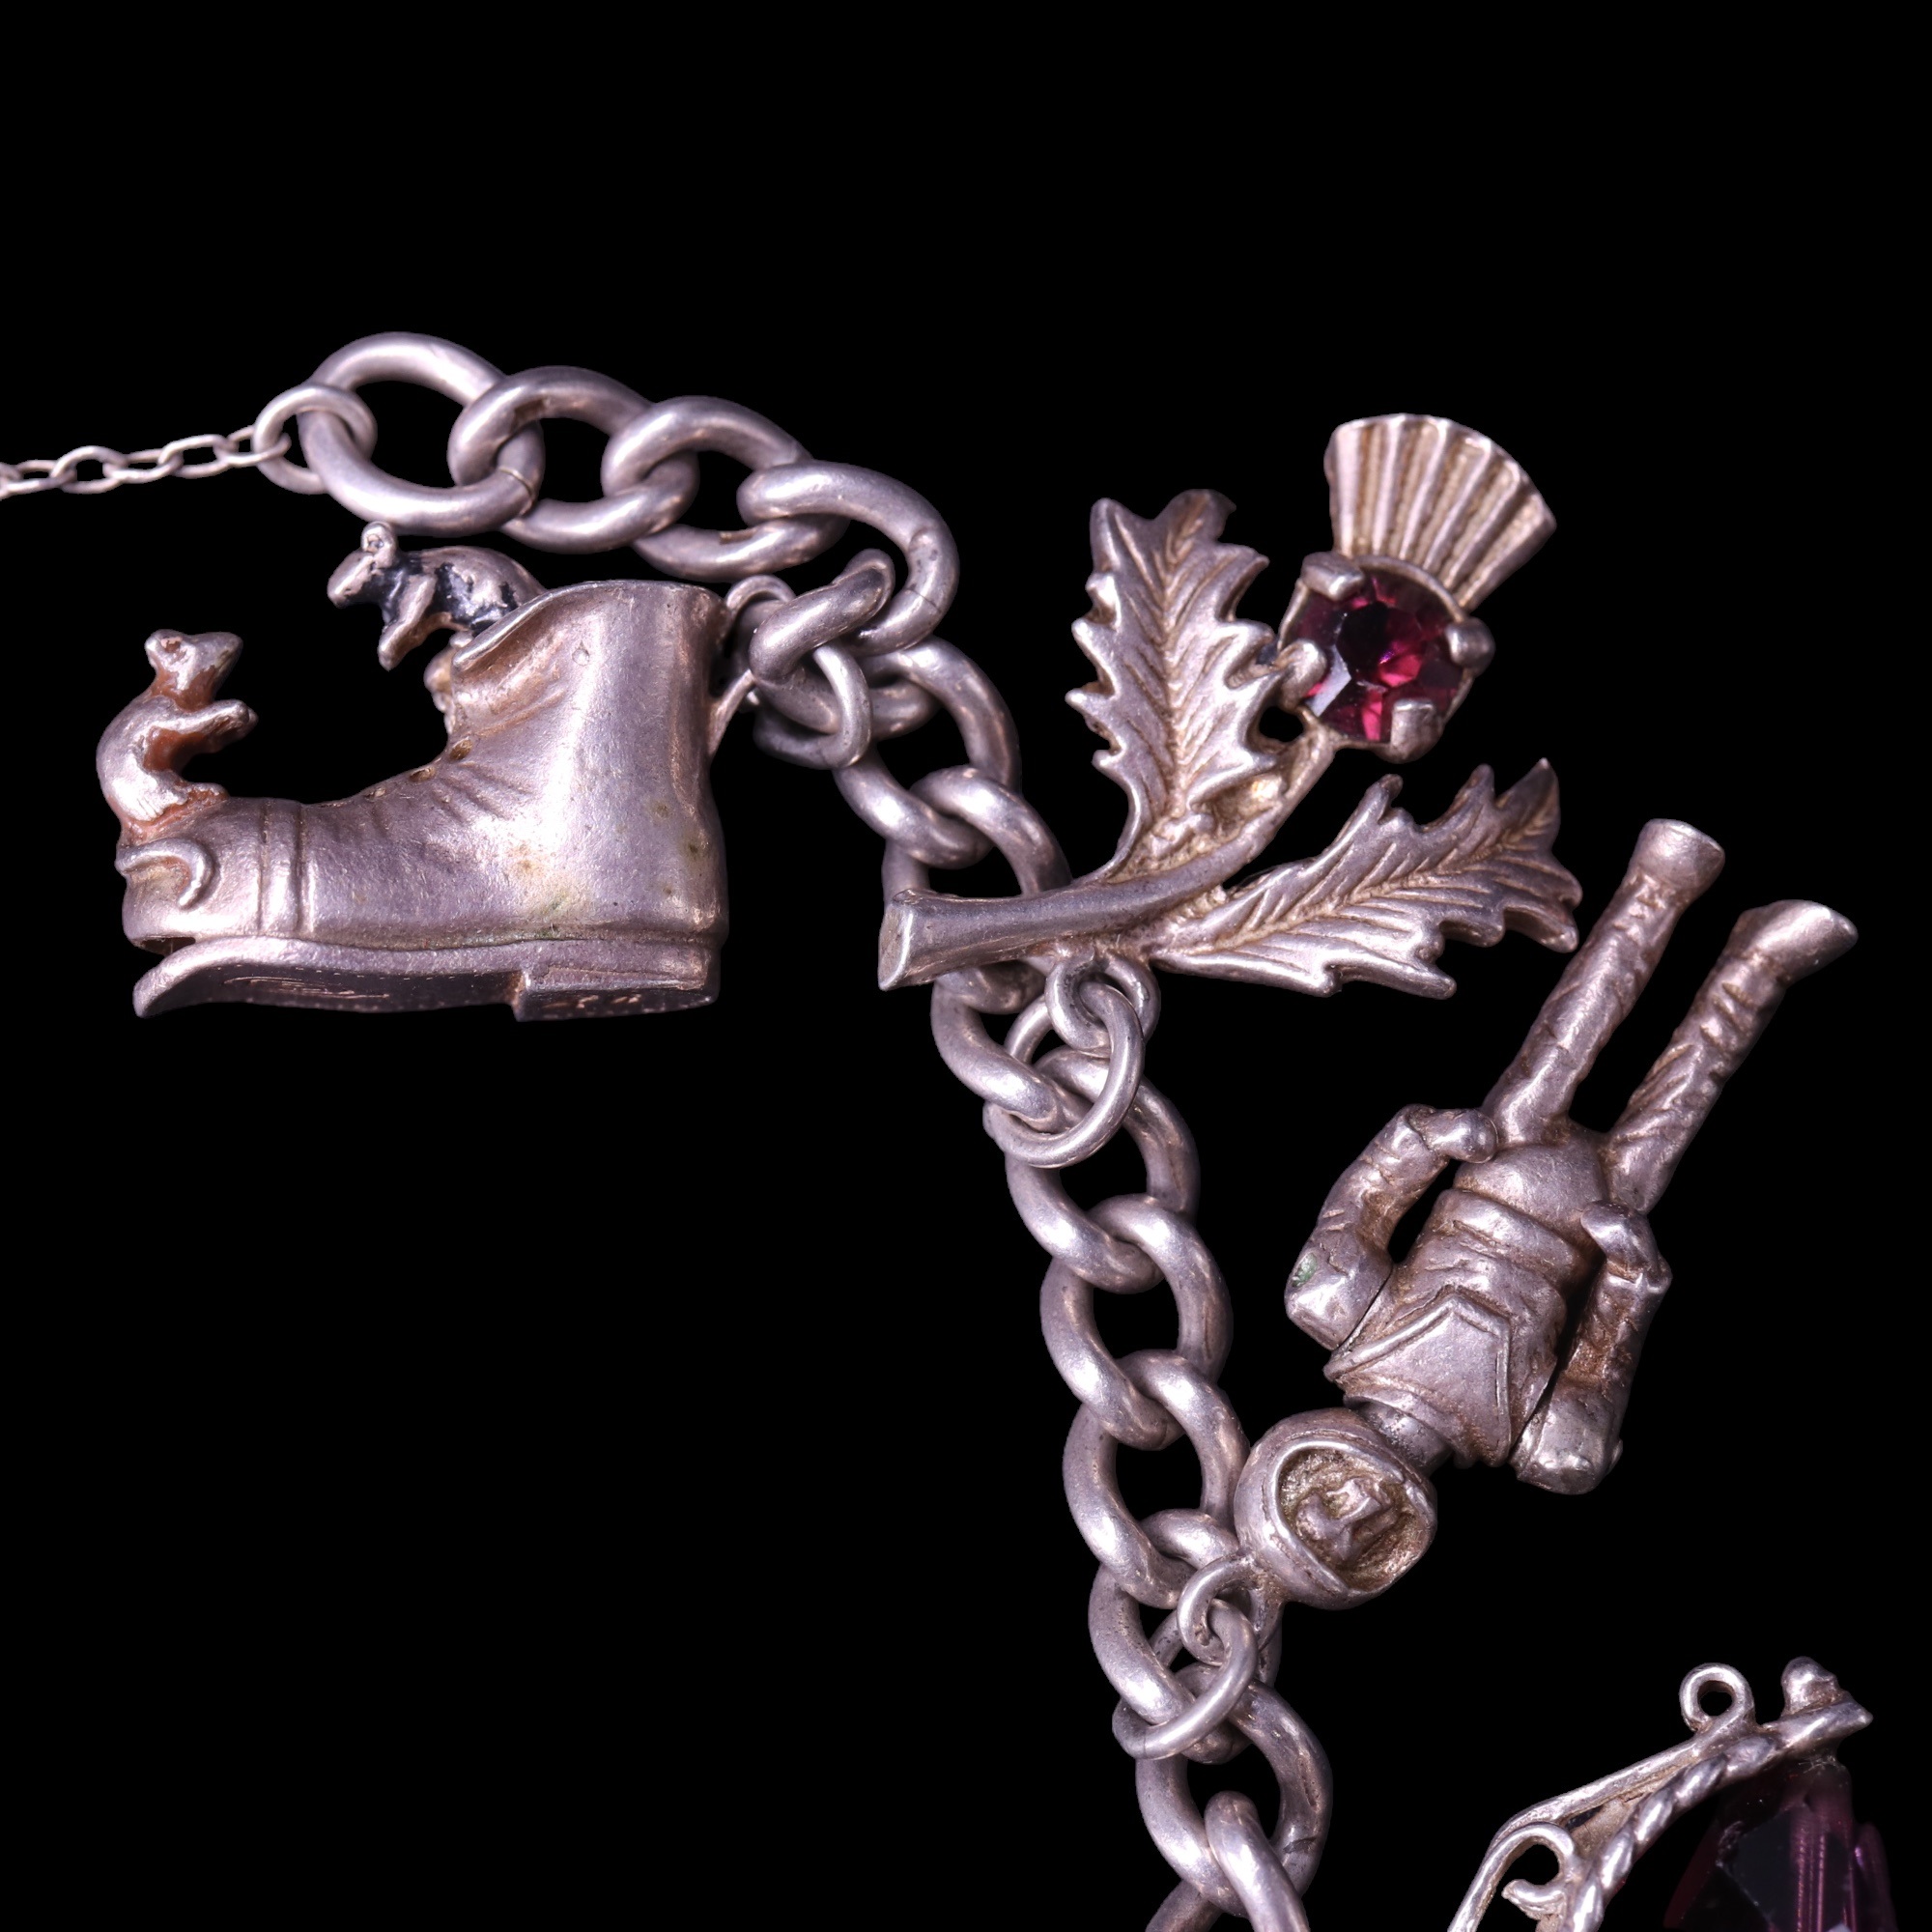 A vintage silver charm bracelet including spaceman and ship in a bottle charms, 47 g - Image 2 of 4